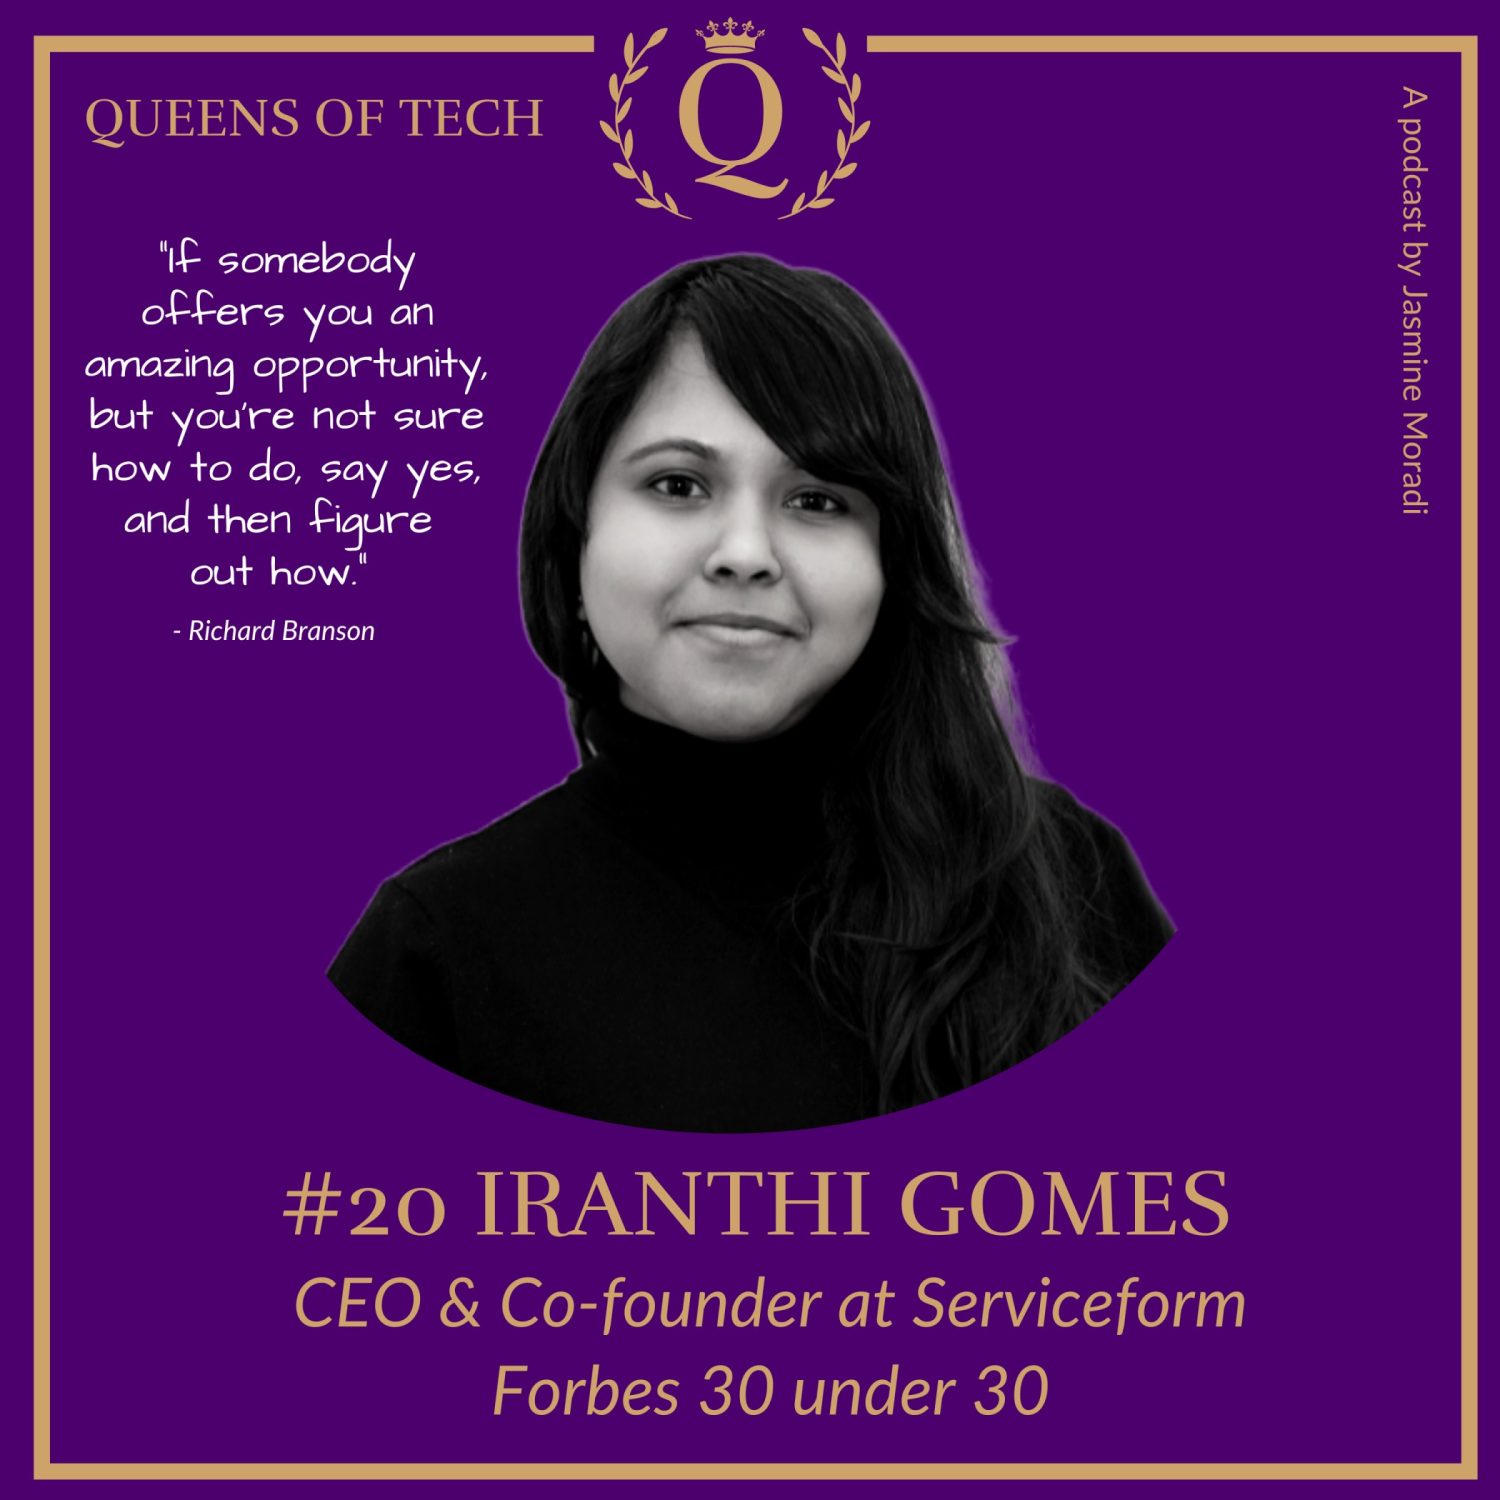 Iranthi Gomes Cofounder, Serviceform-Queens of Tech